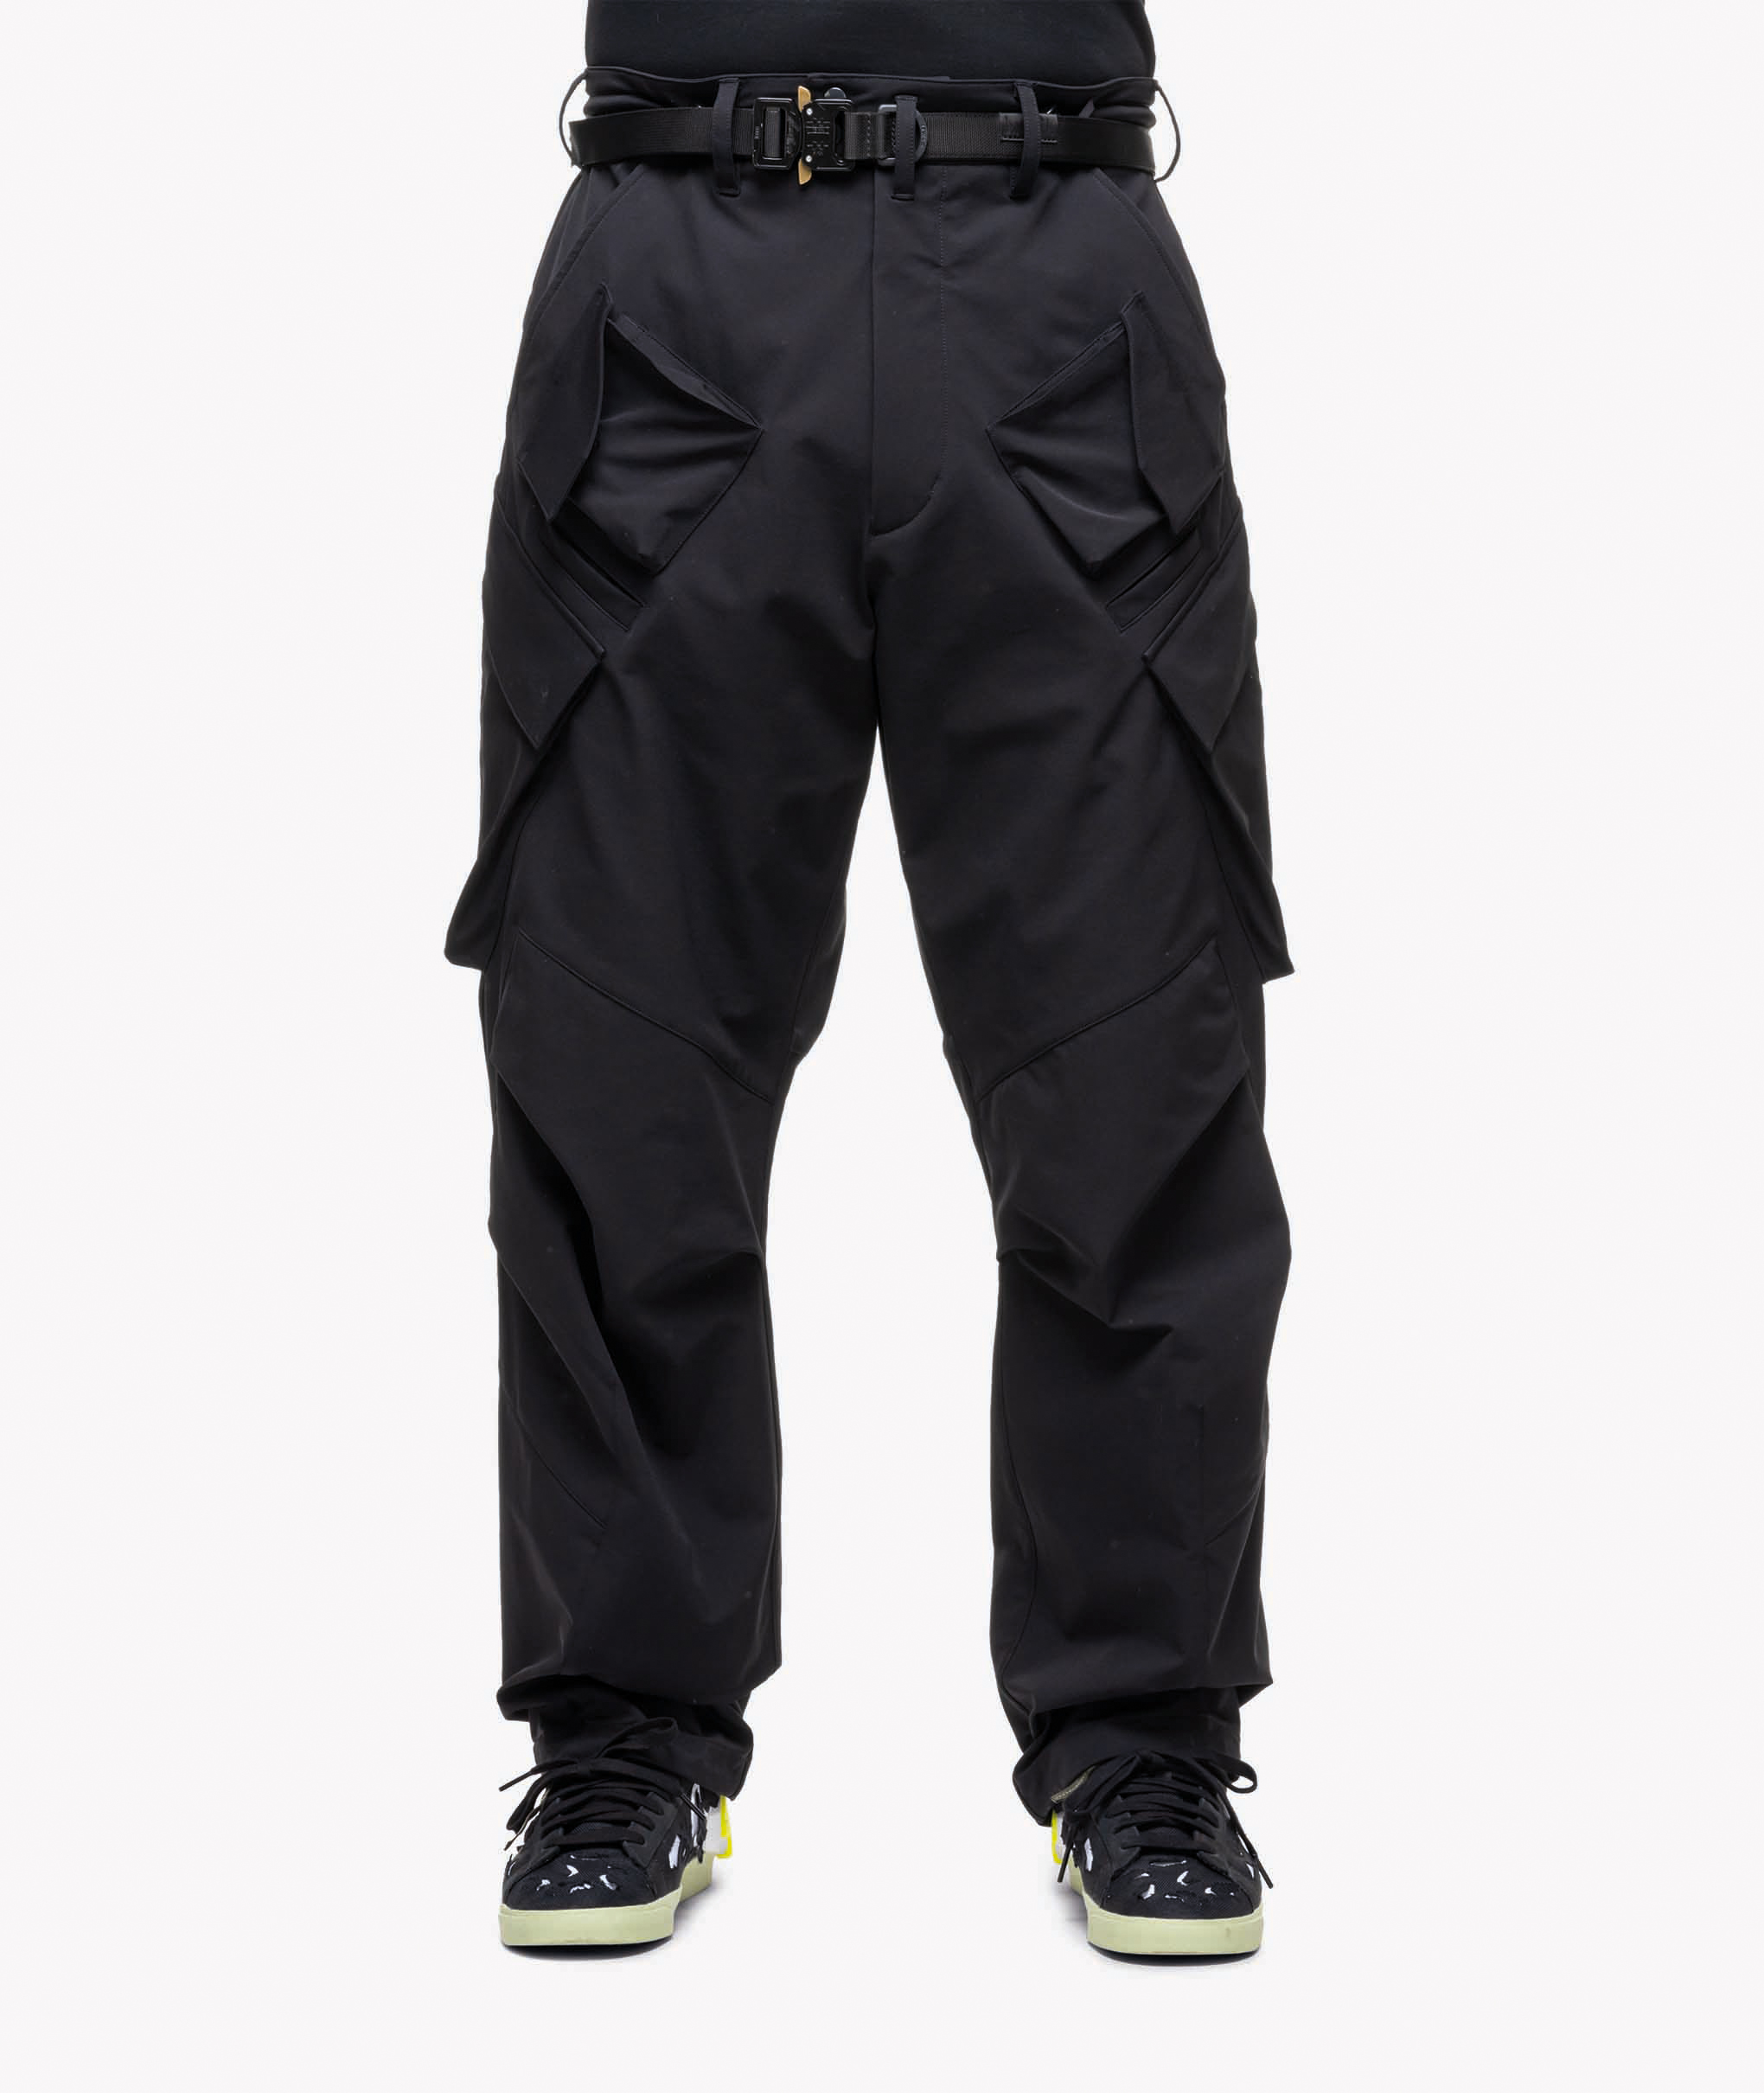 Norse Store | Shipping Worldwide - Acronym P44-DS - Black